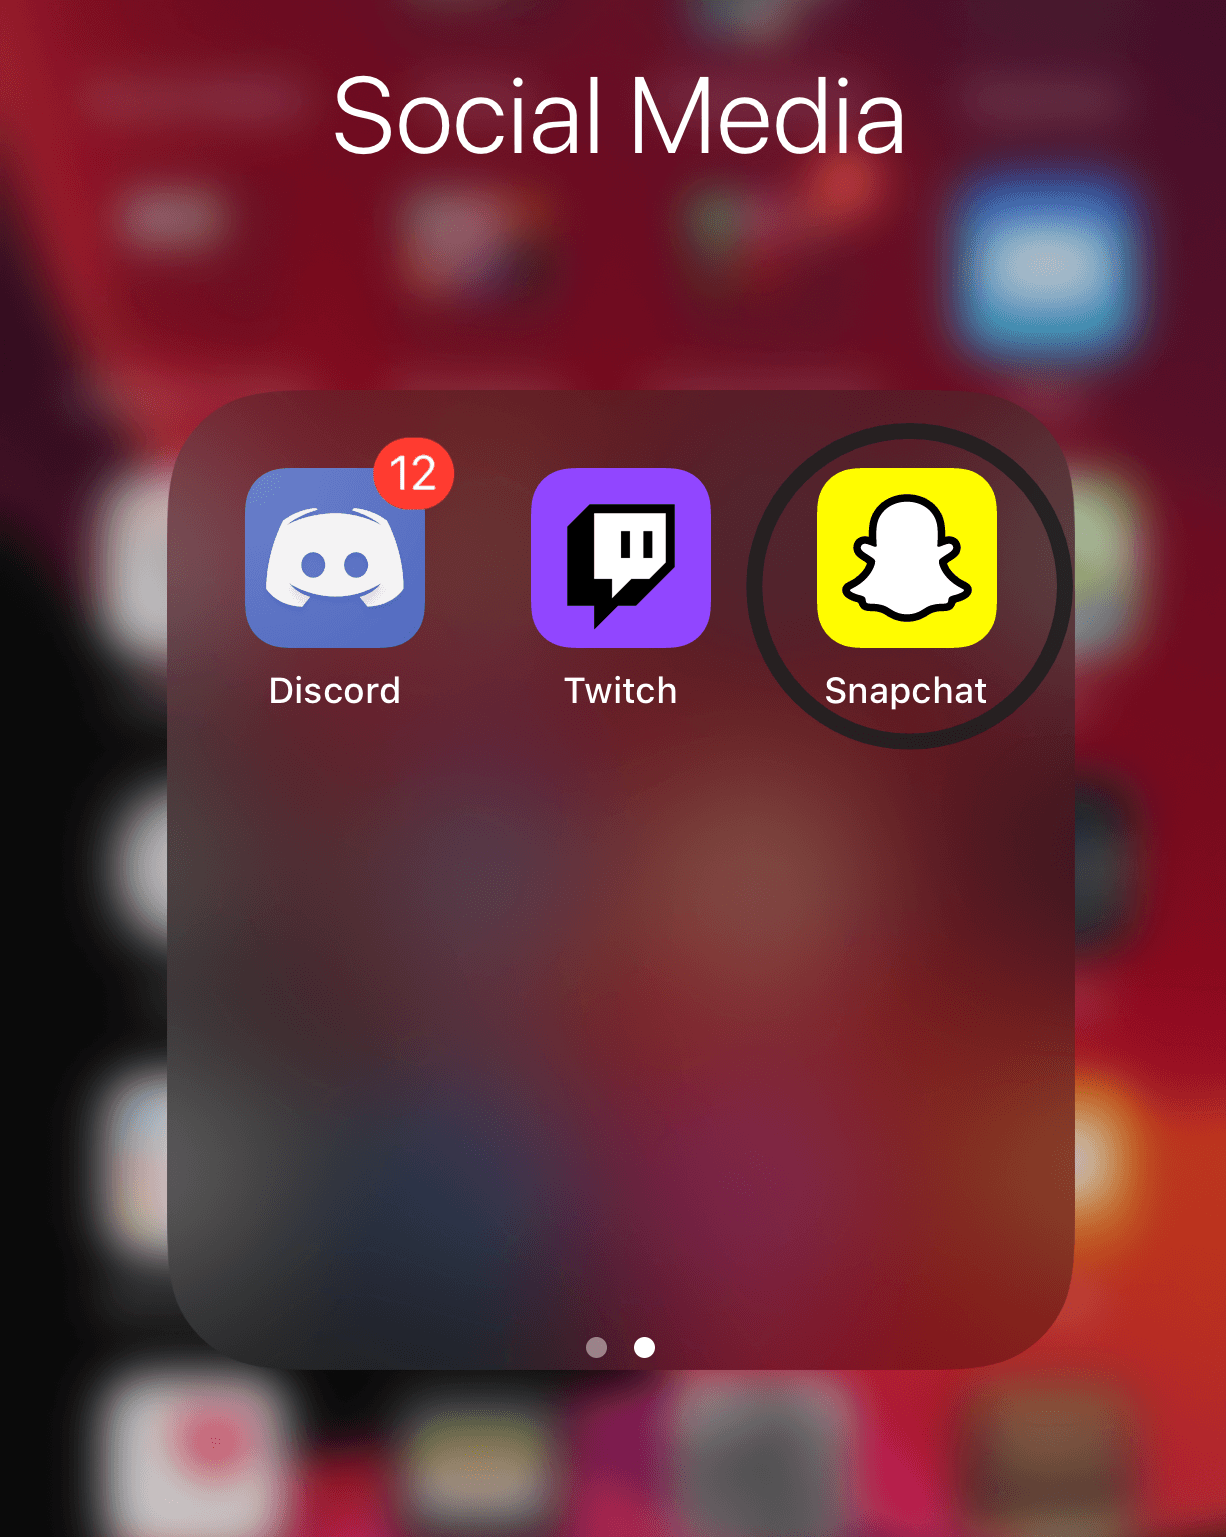 Clear Snapchat cache through the app settings